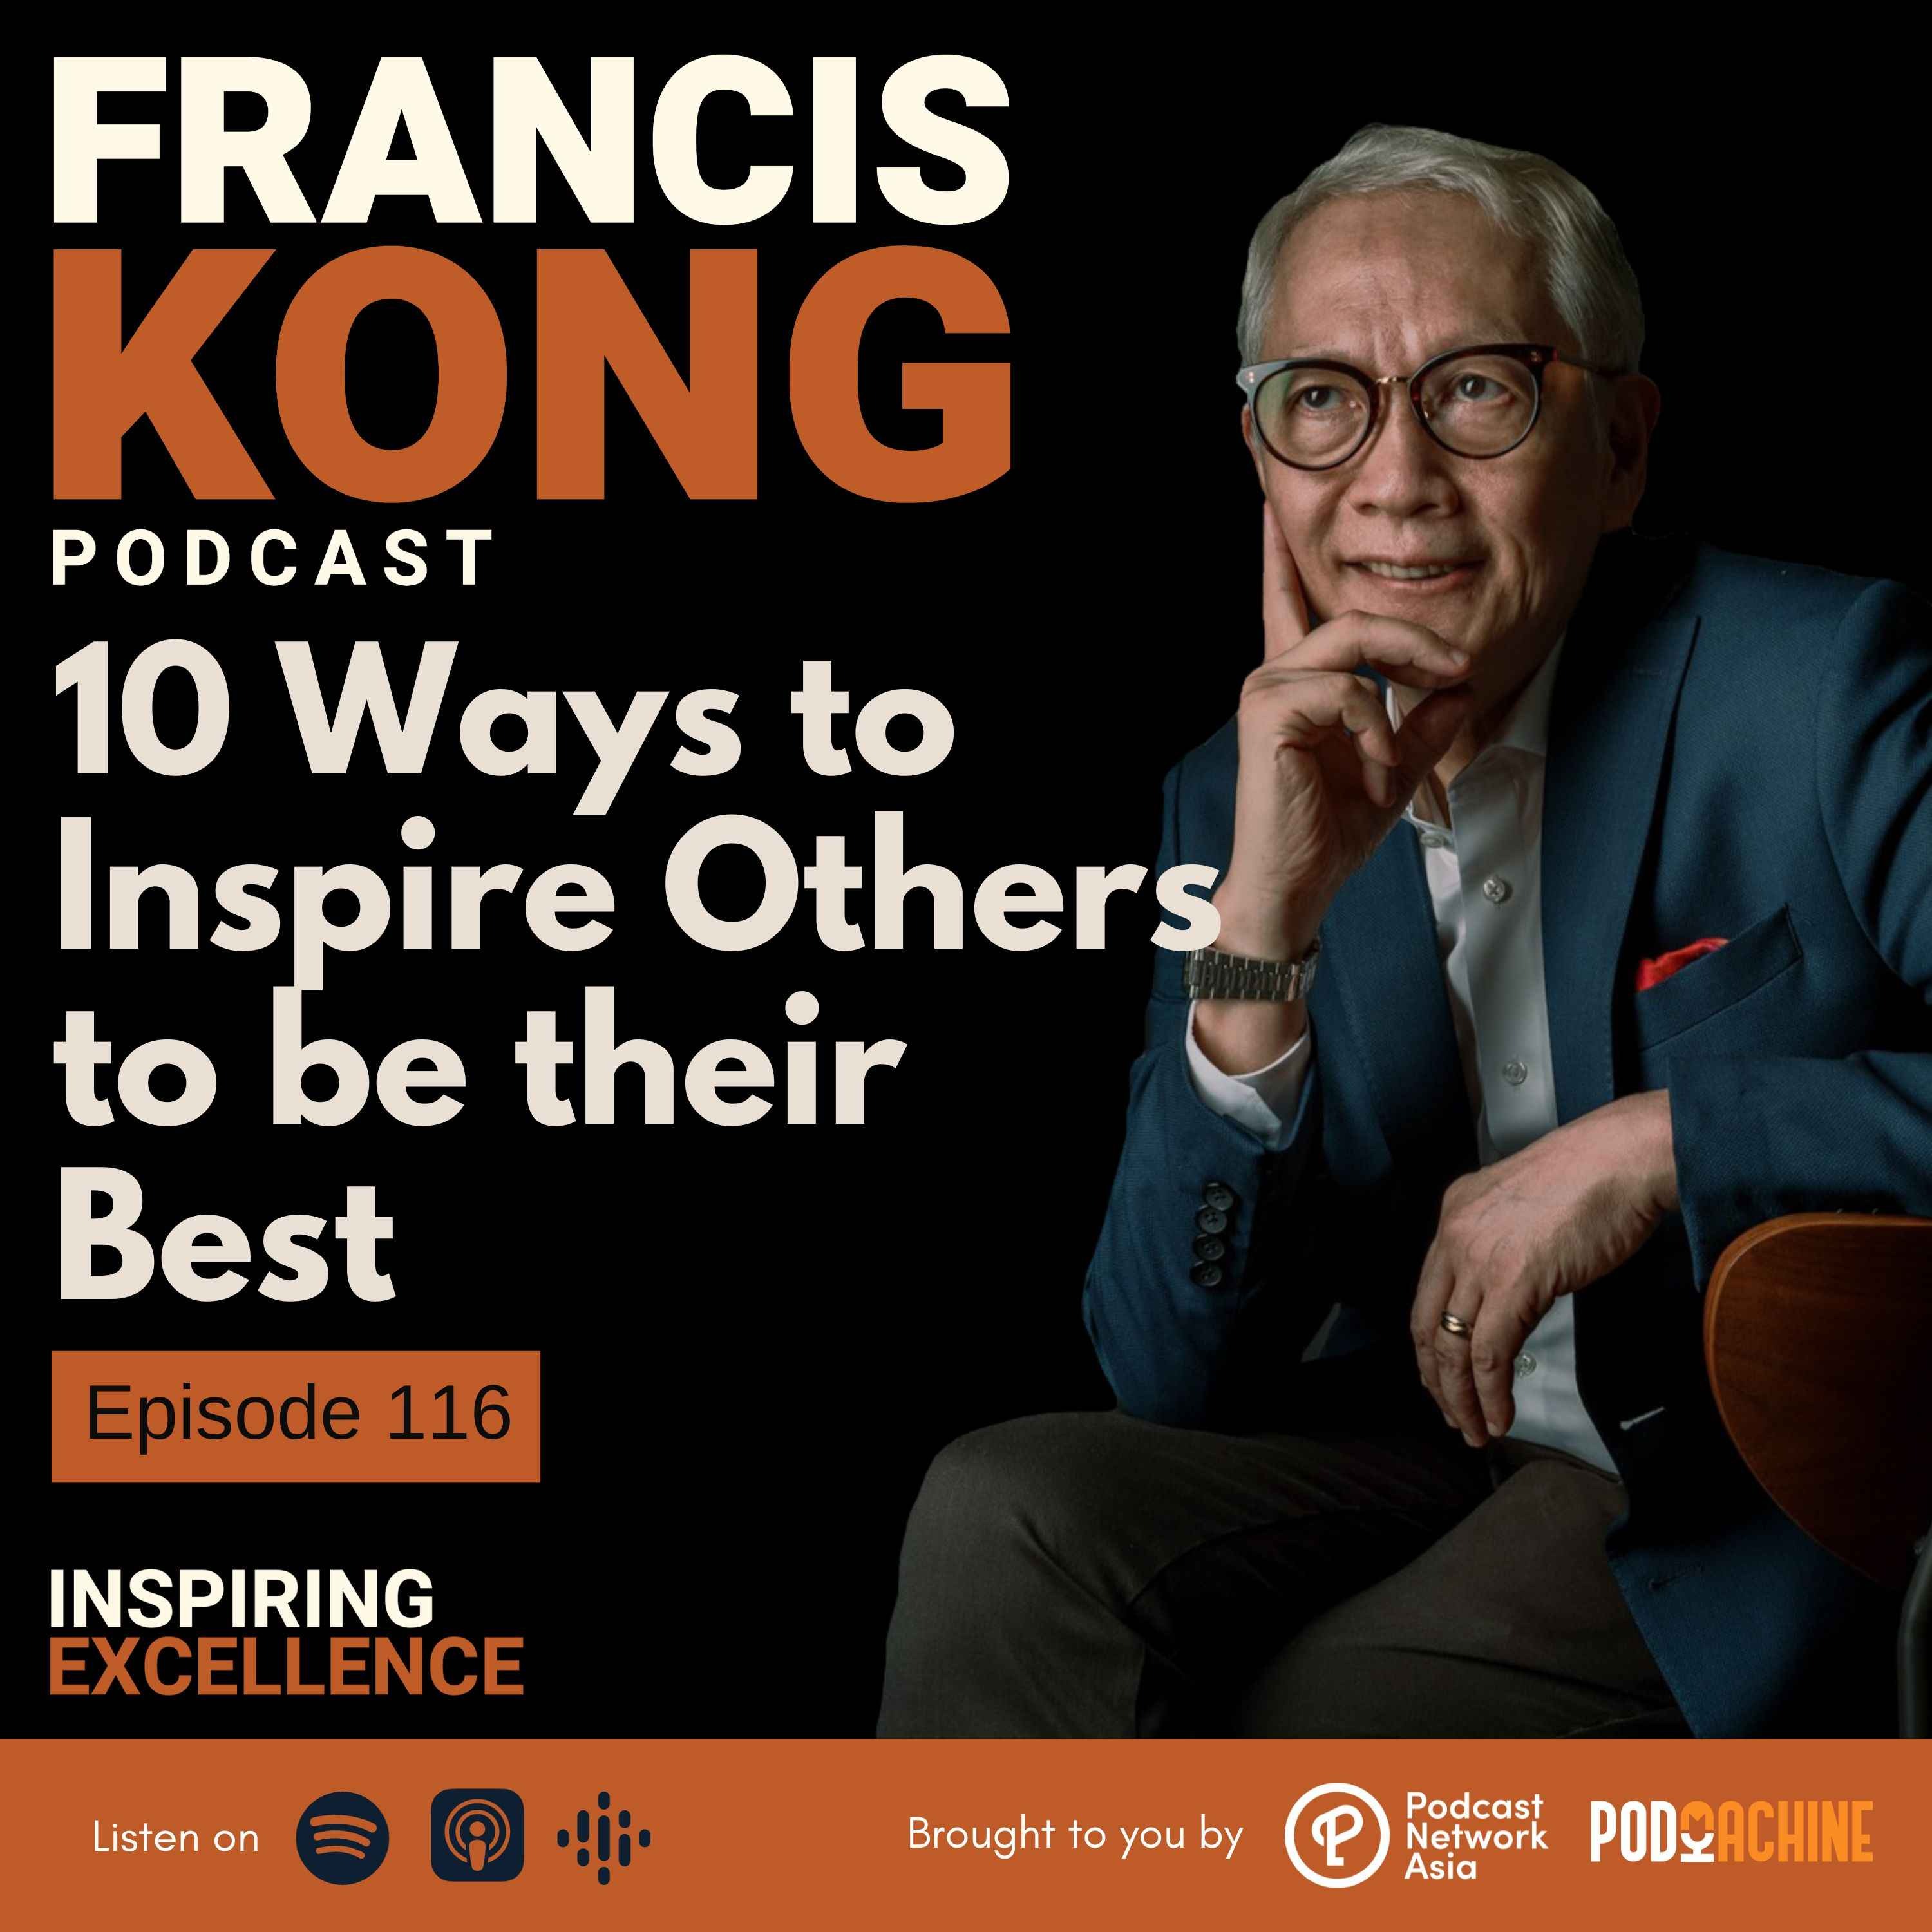 Episode 116: 10 Ways to Inspire Others to be their Best